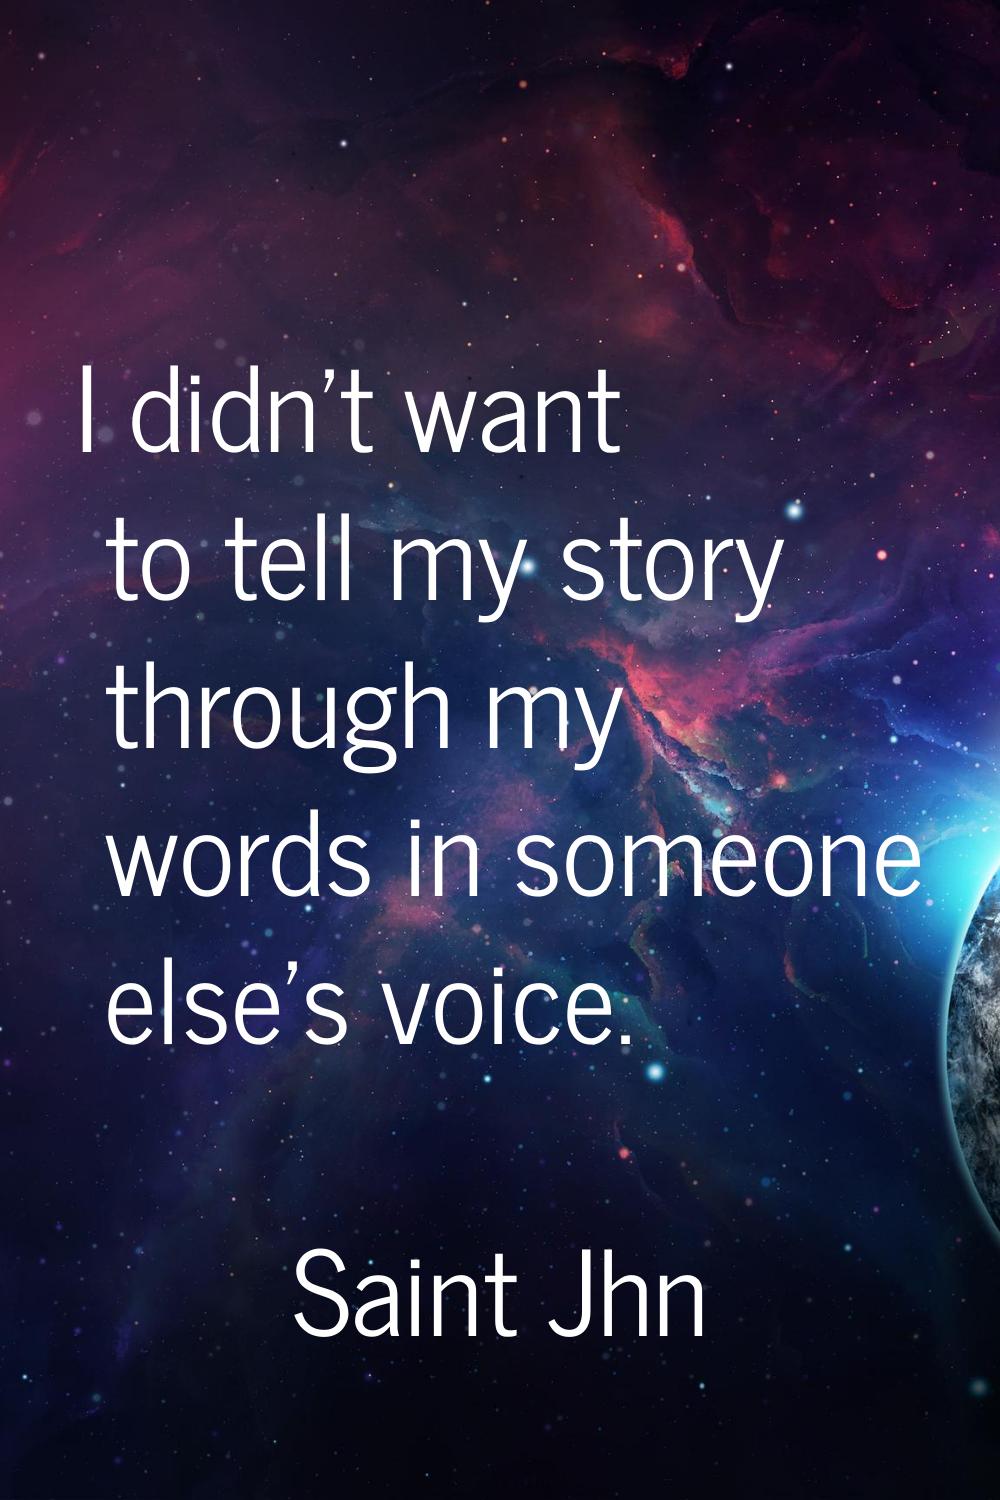 I didn't want to tell my story through my words in someone else's voice.